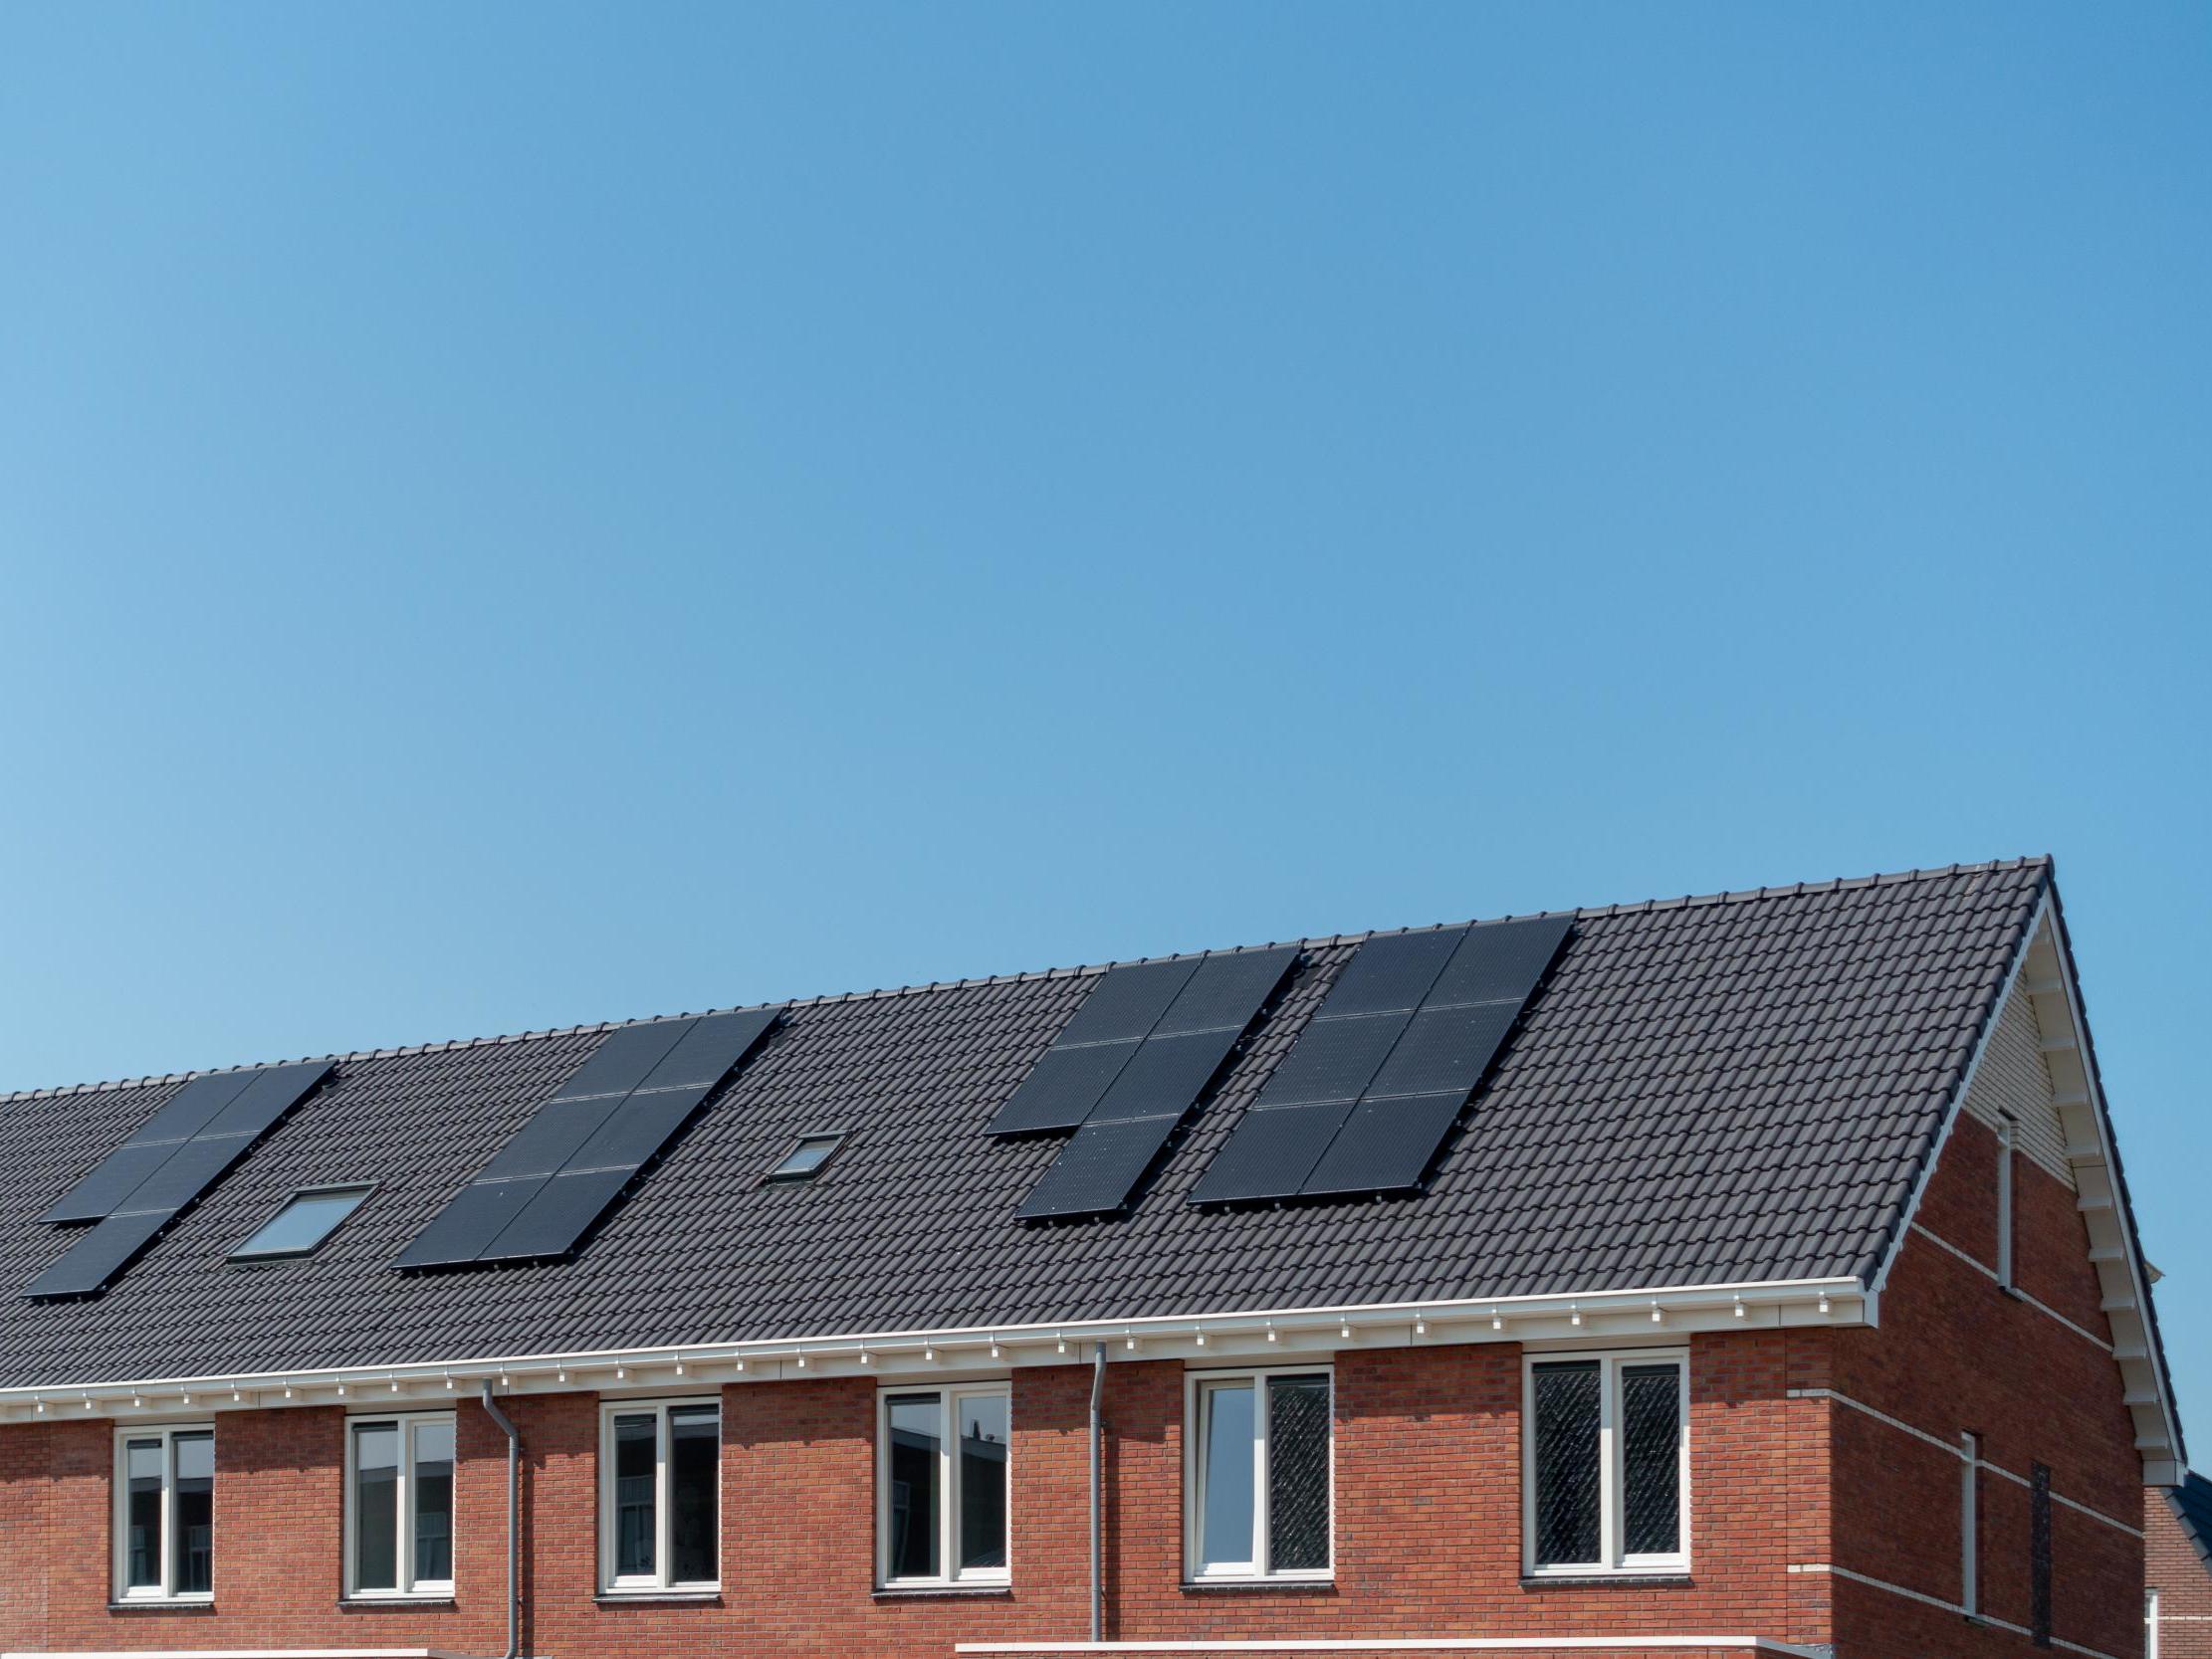 File image of solar panels on house roof.